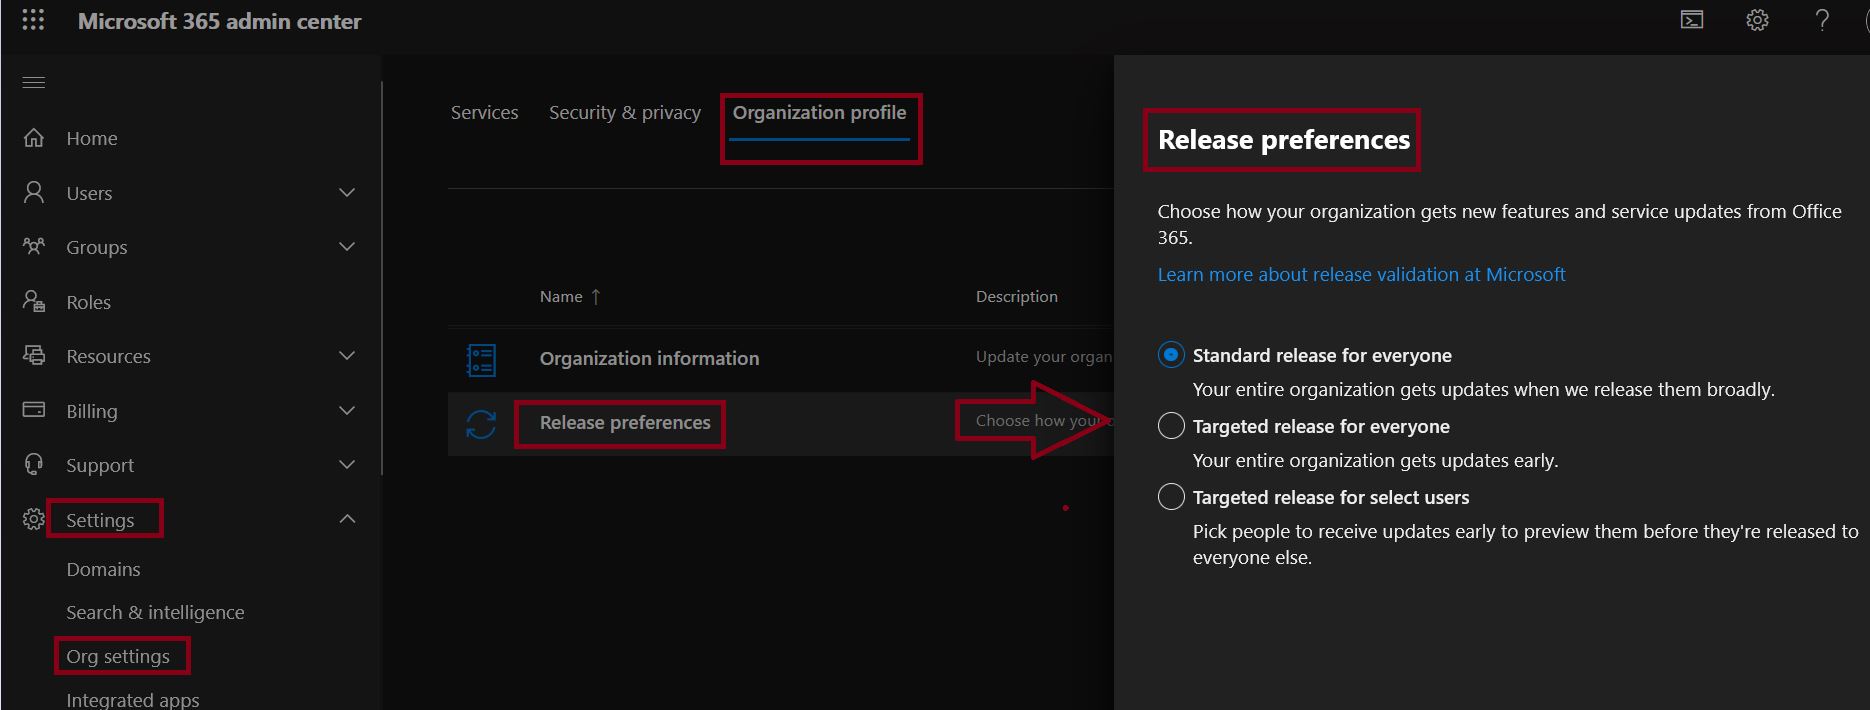 Microsoft 365 new features - Release Preferences settings in Microsoft 365